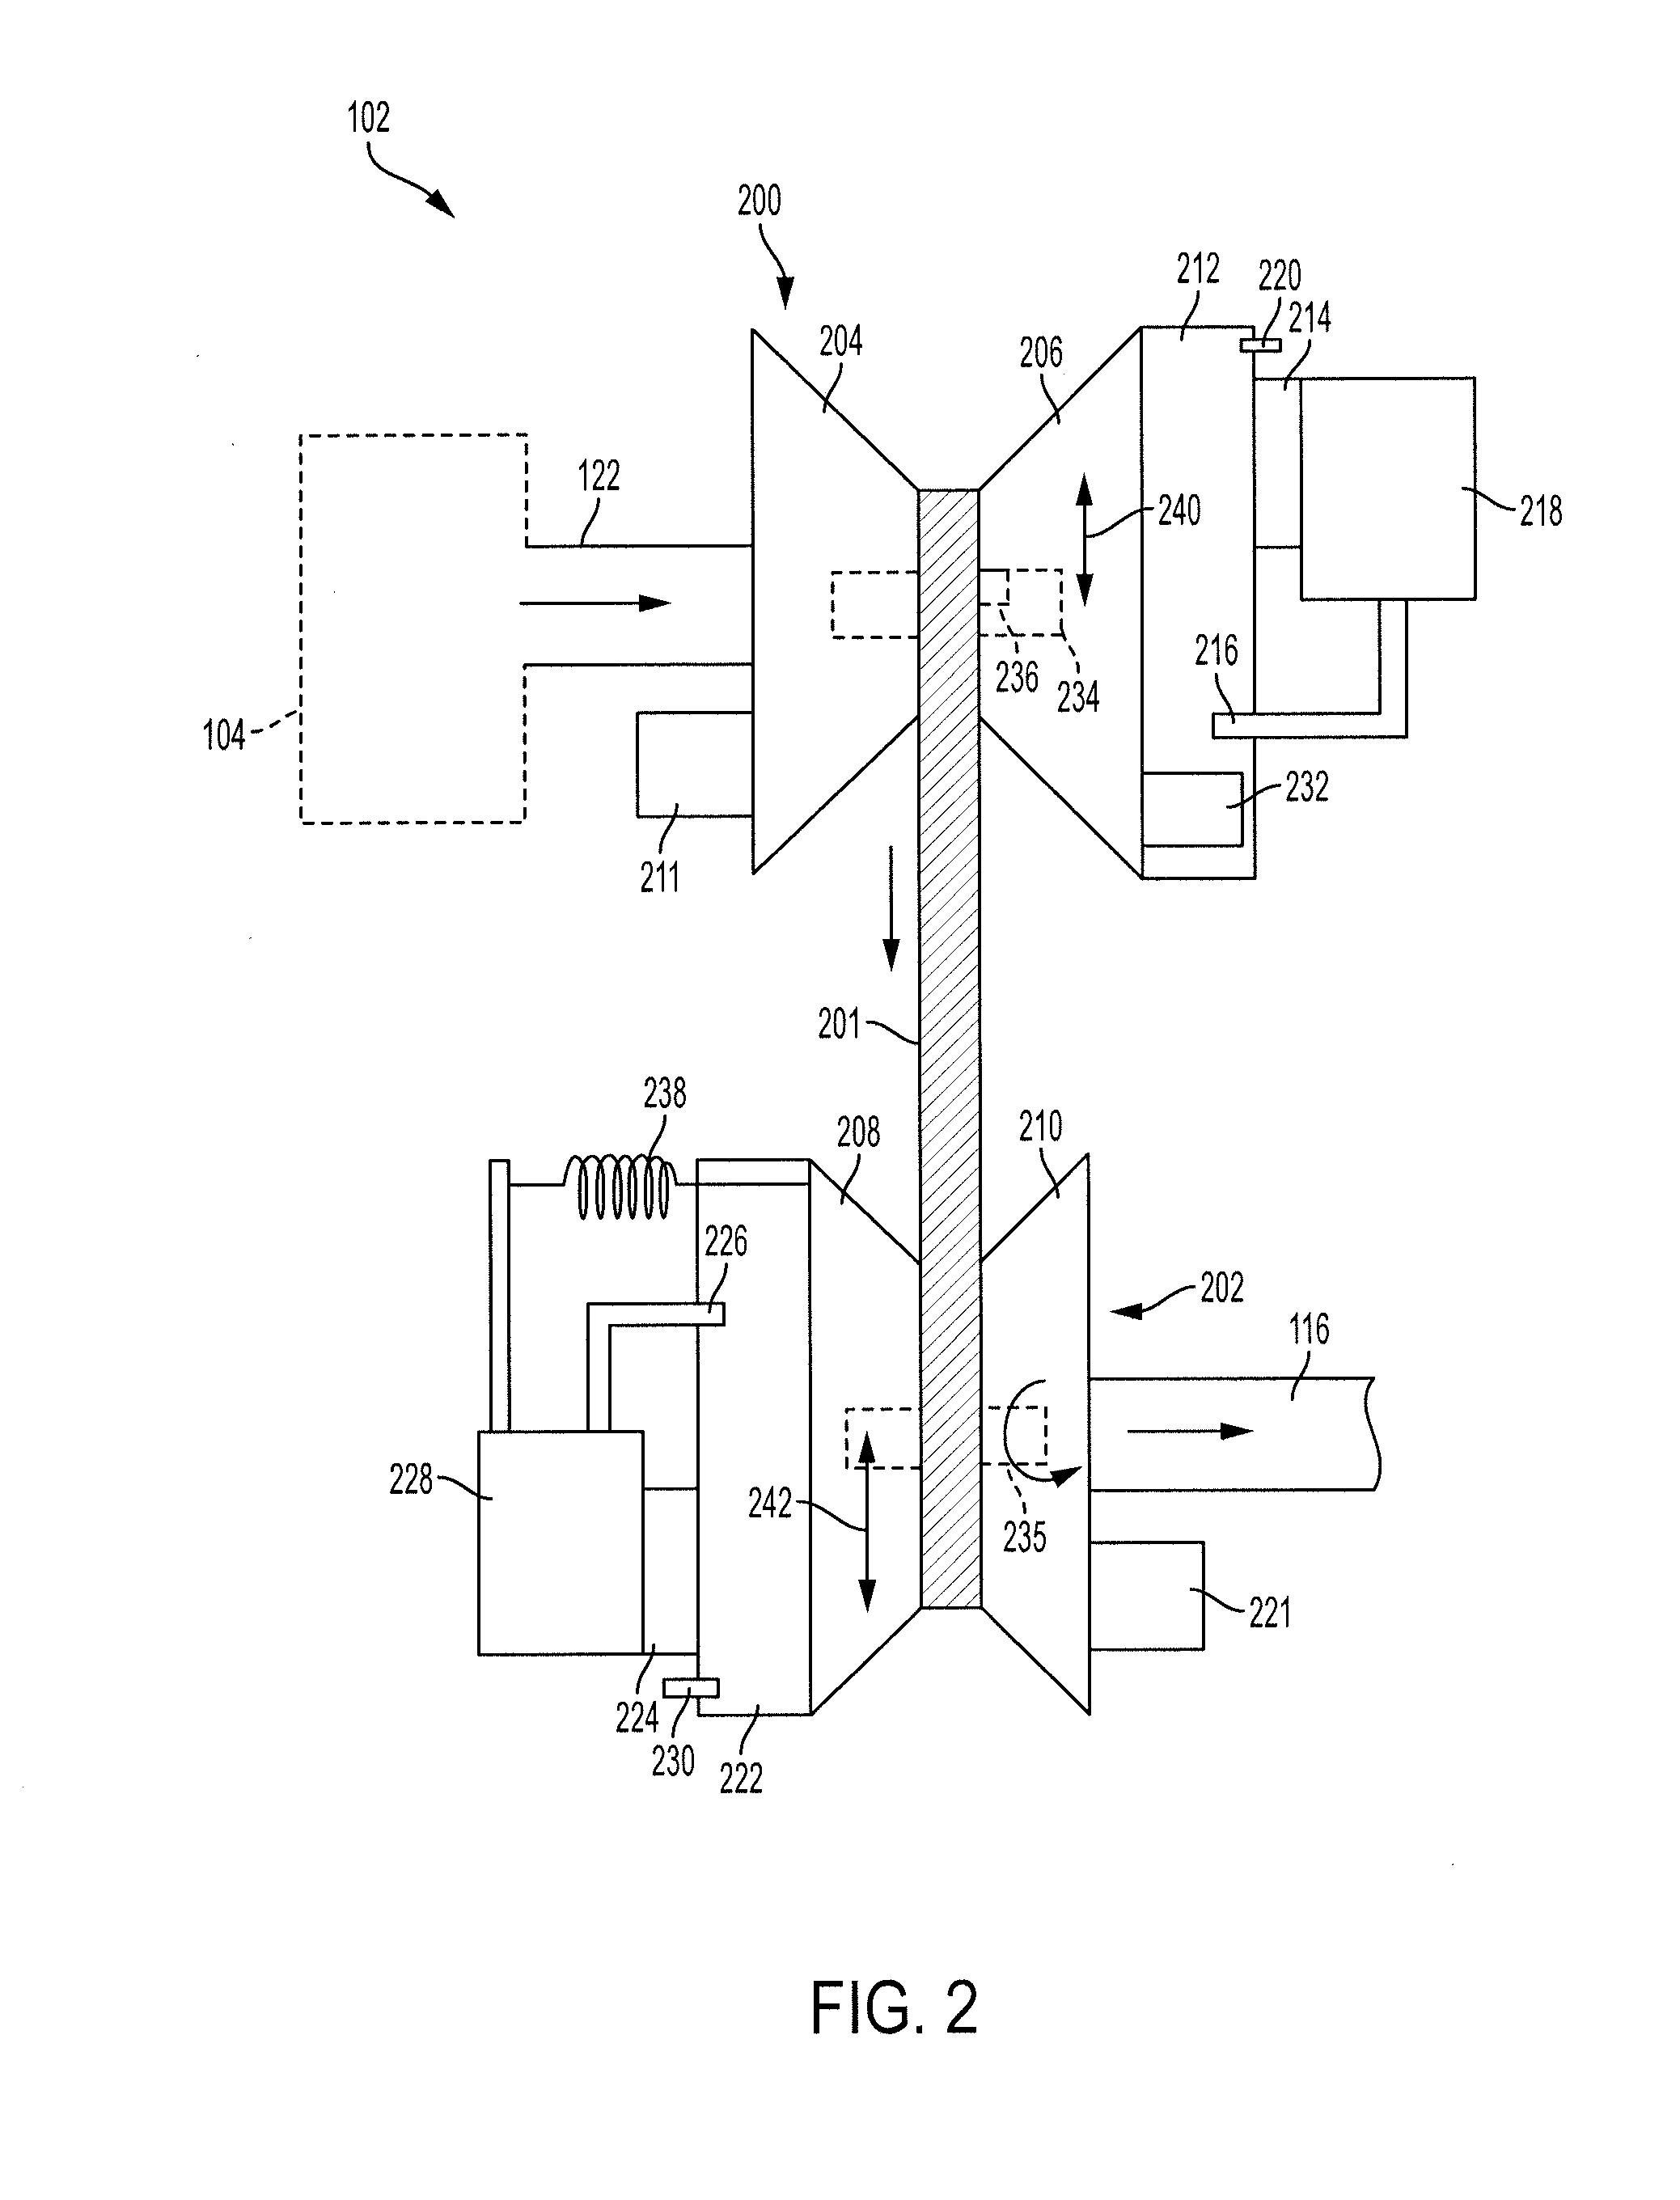 System and method for determining whether a cvt is set to a maximum gear ratio at vehicle startup